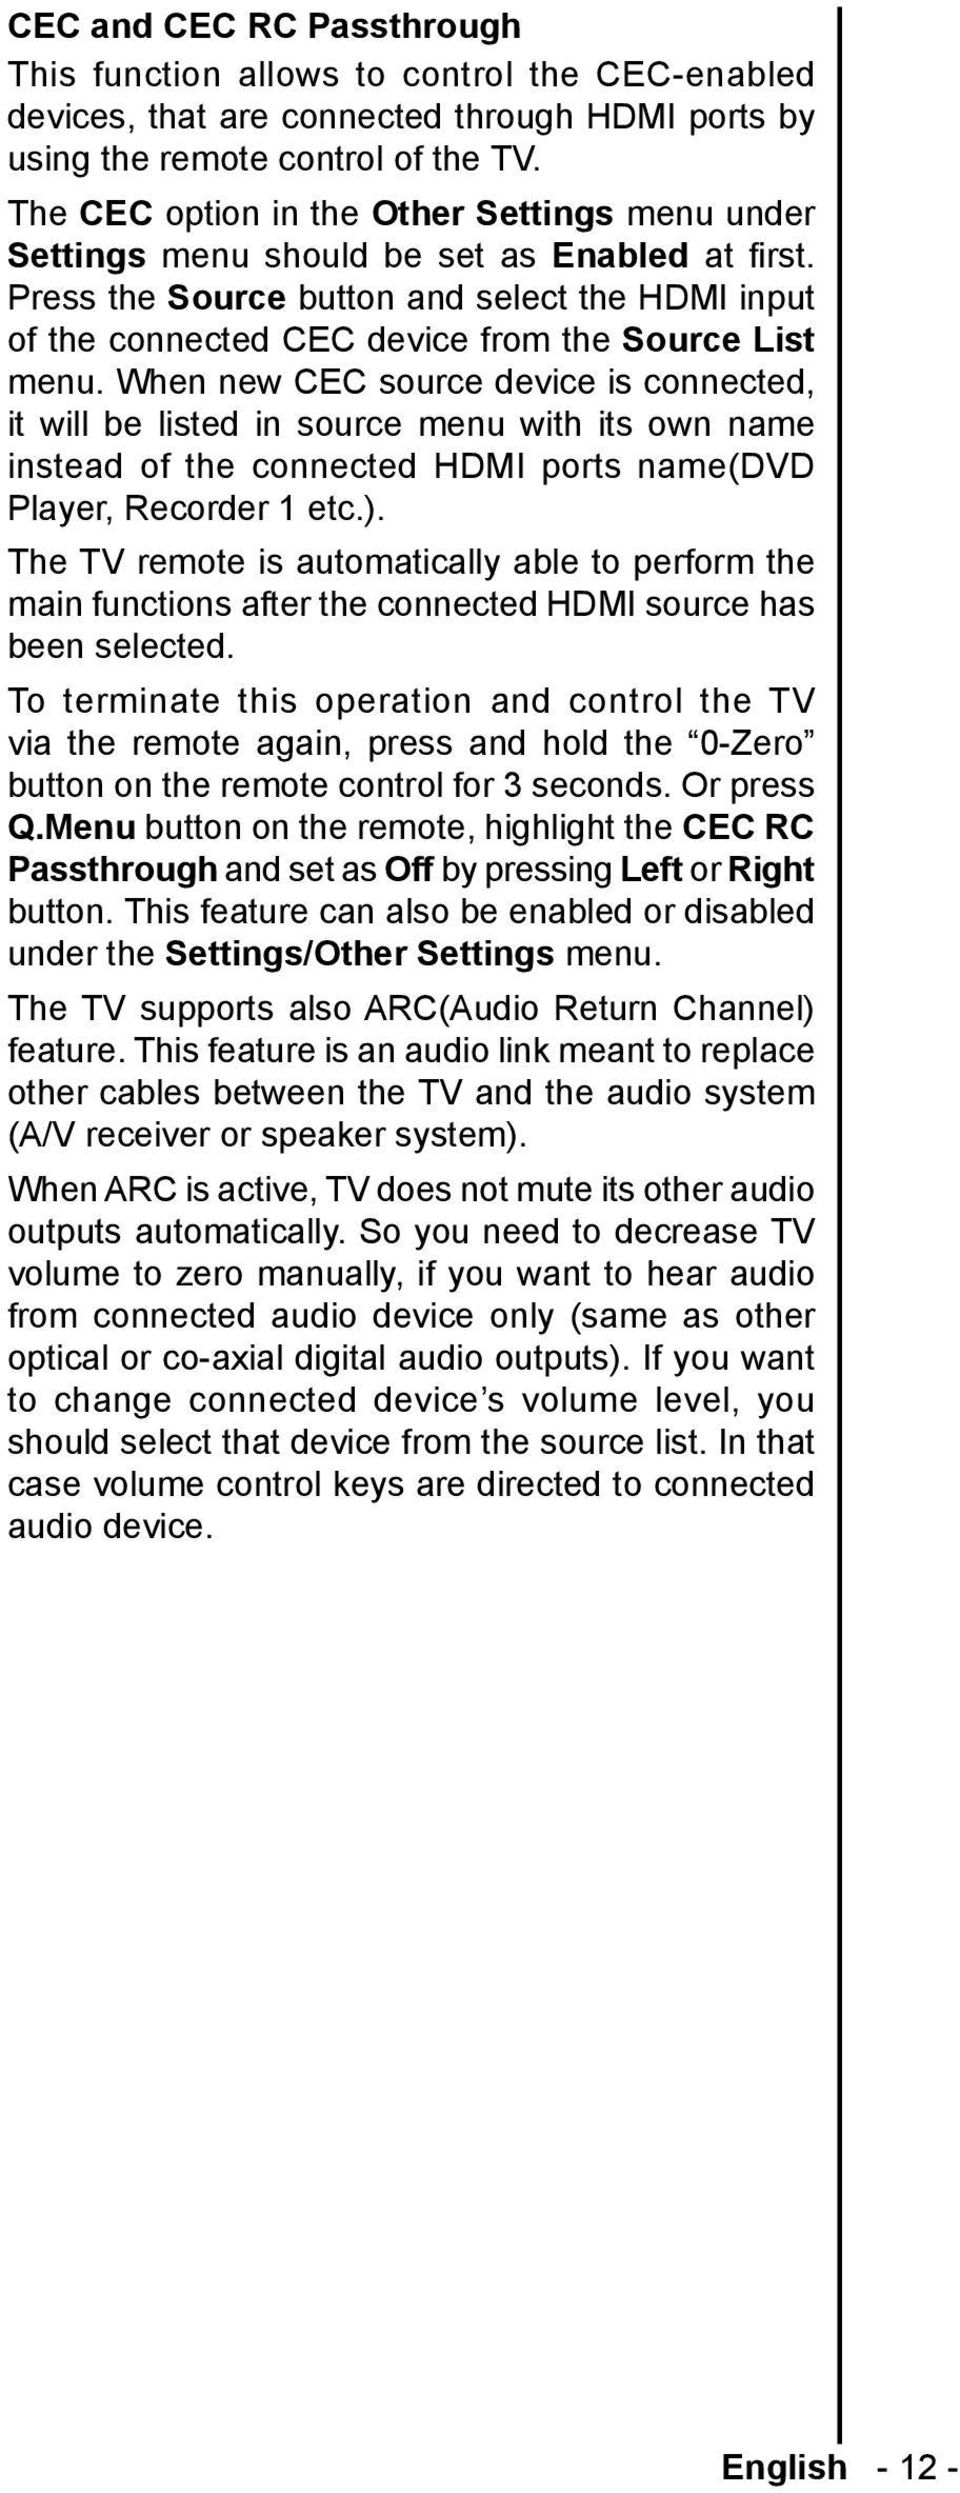 Press the Source button and select the HDMI input of the connected CEC device from the Source List menu.